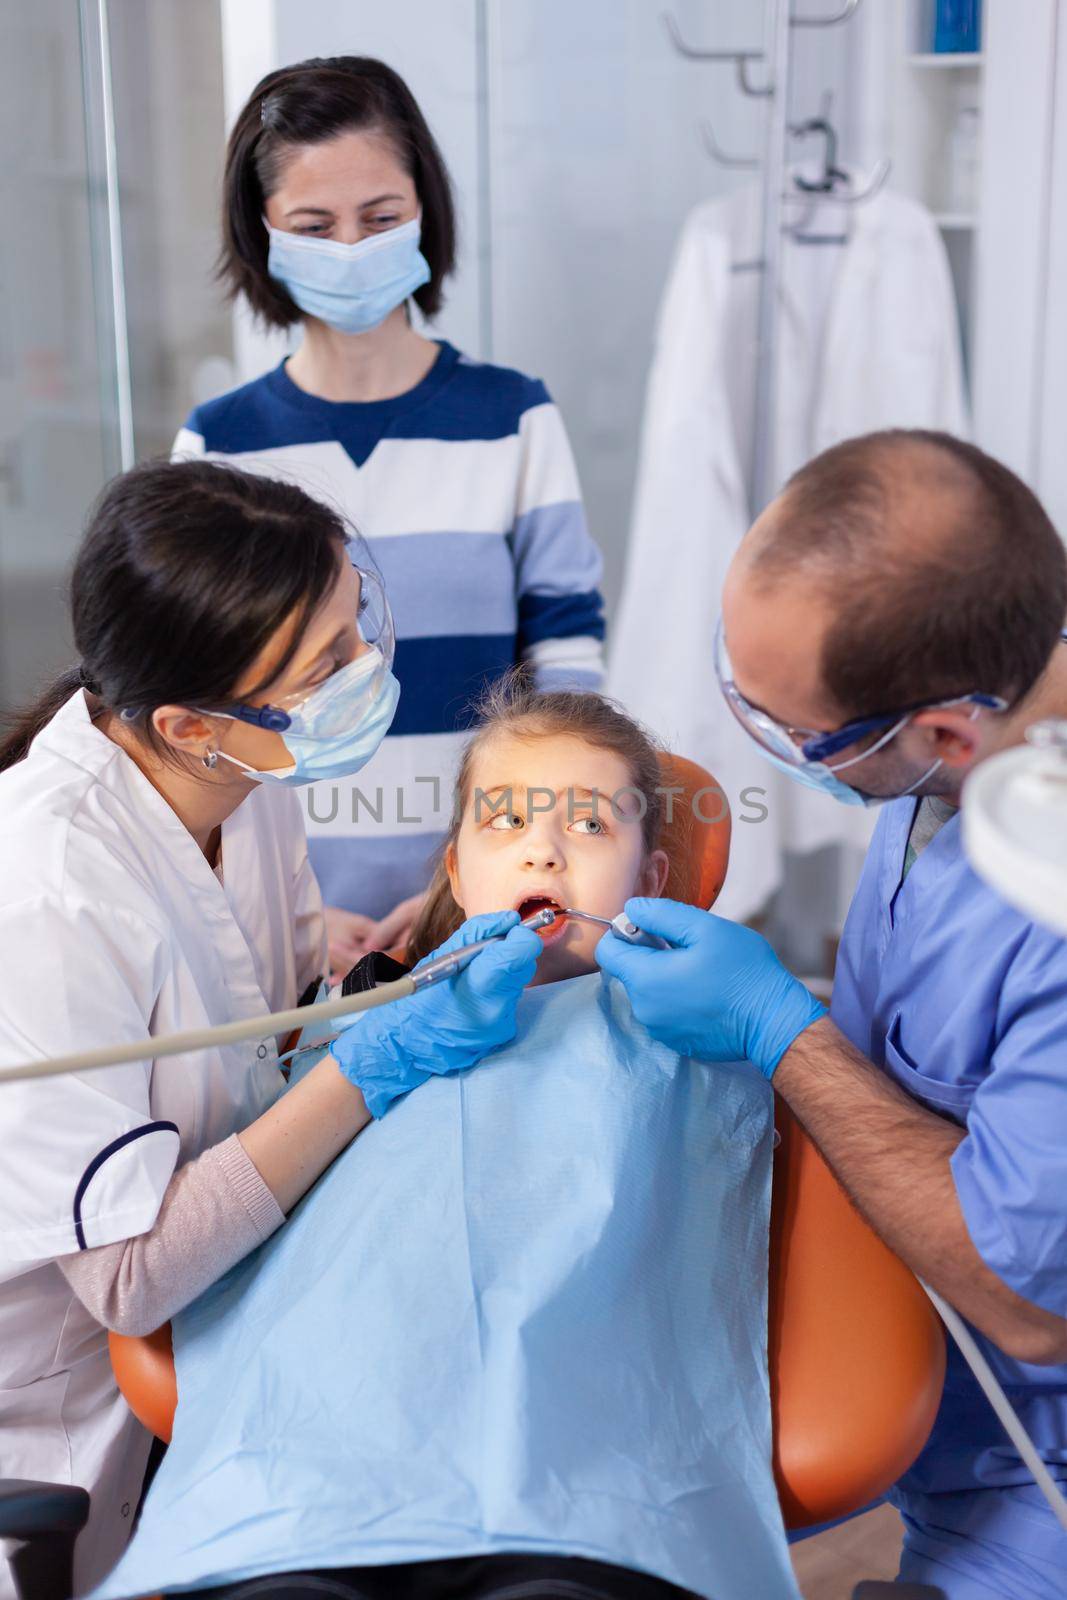 Child with mouth open looking at dentist assistant by DCStudio